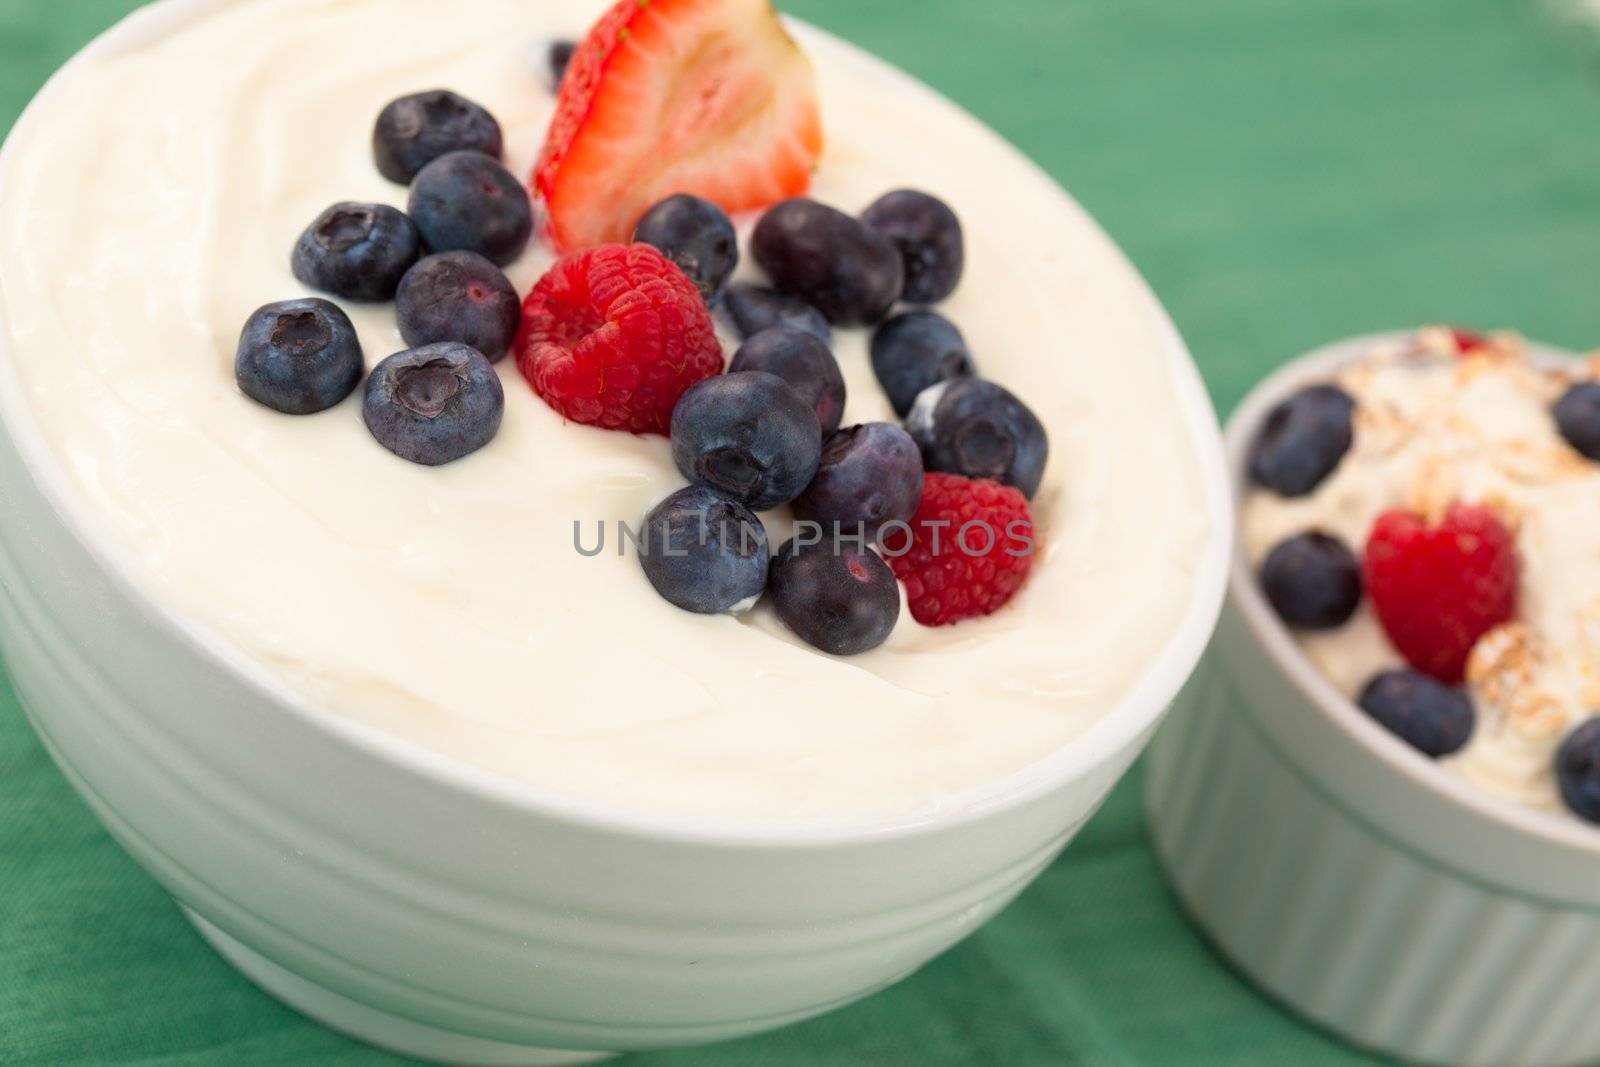 Bowl of cream fruits on the table